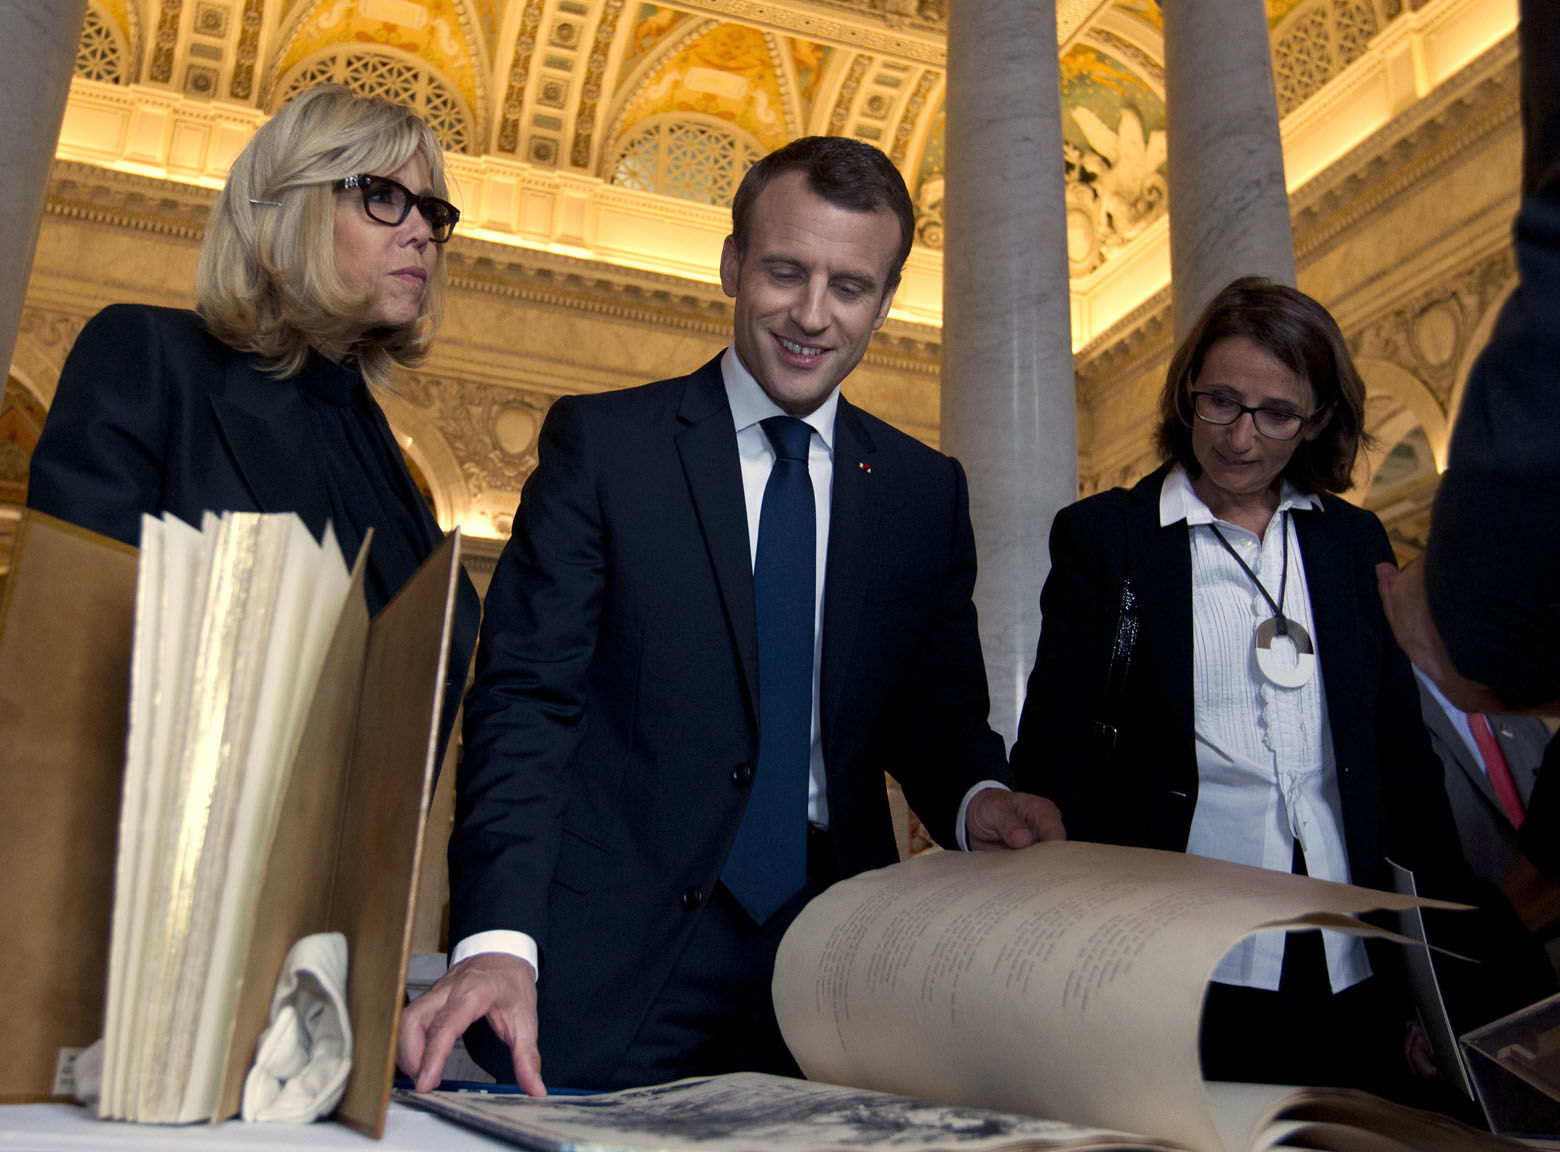 PHOTOS Pomp-filled DC visit for French president, wife WTOP News